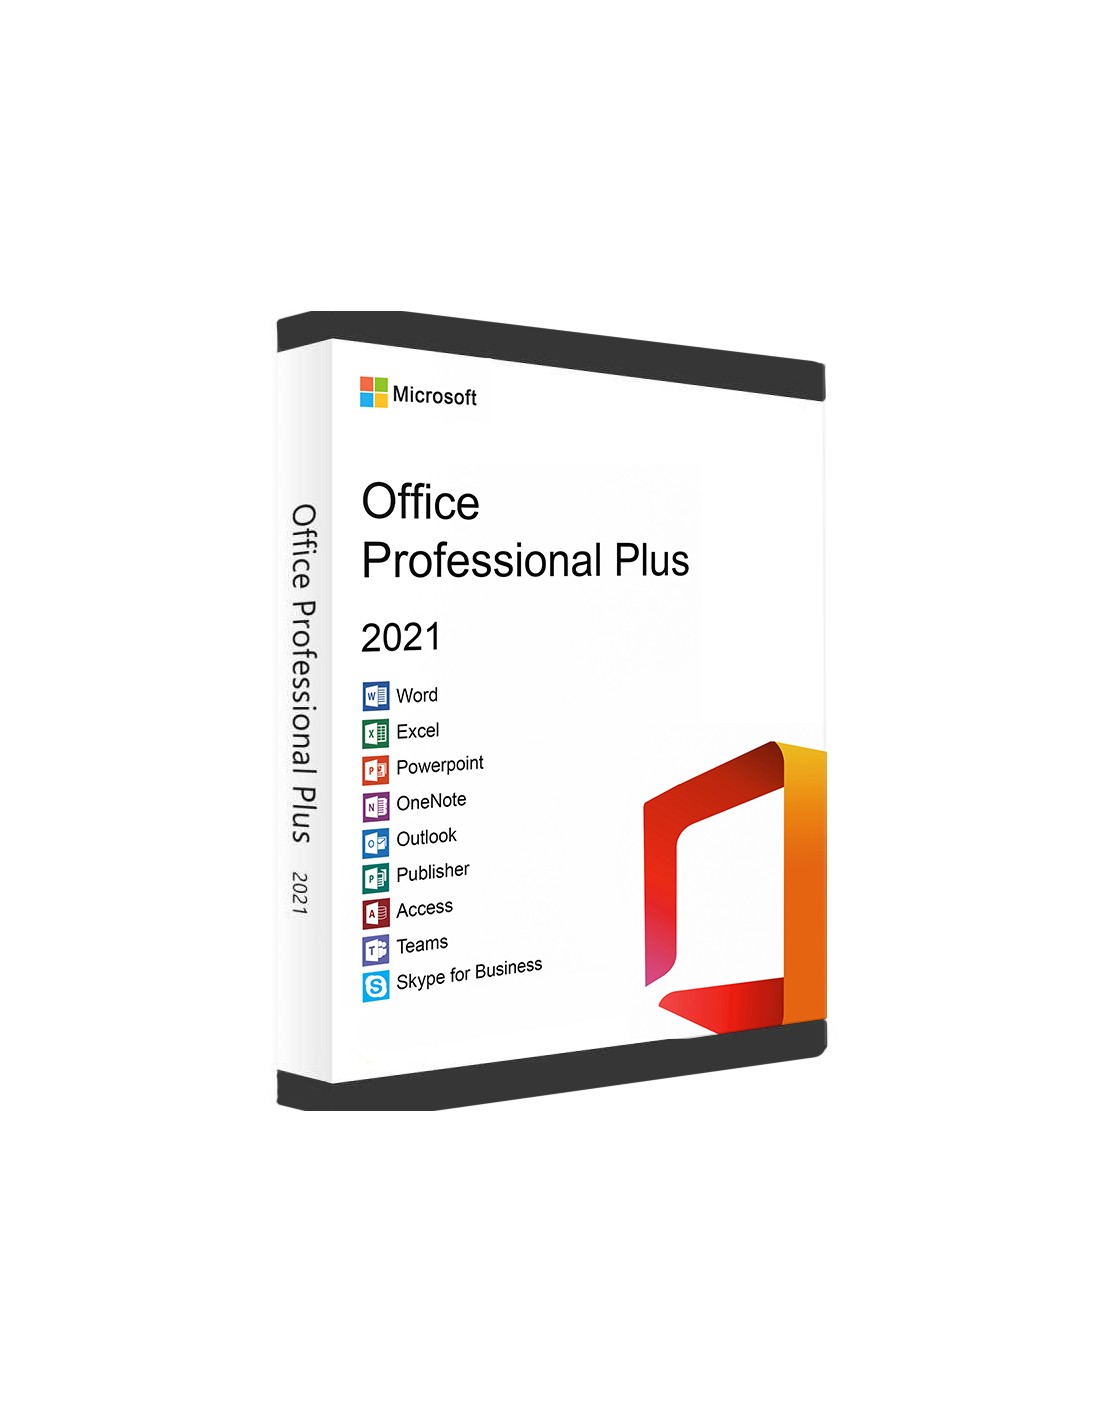 microsoft office 2021 professional plus free download